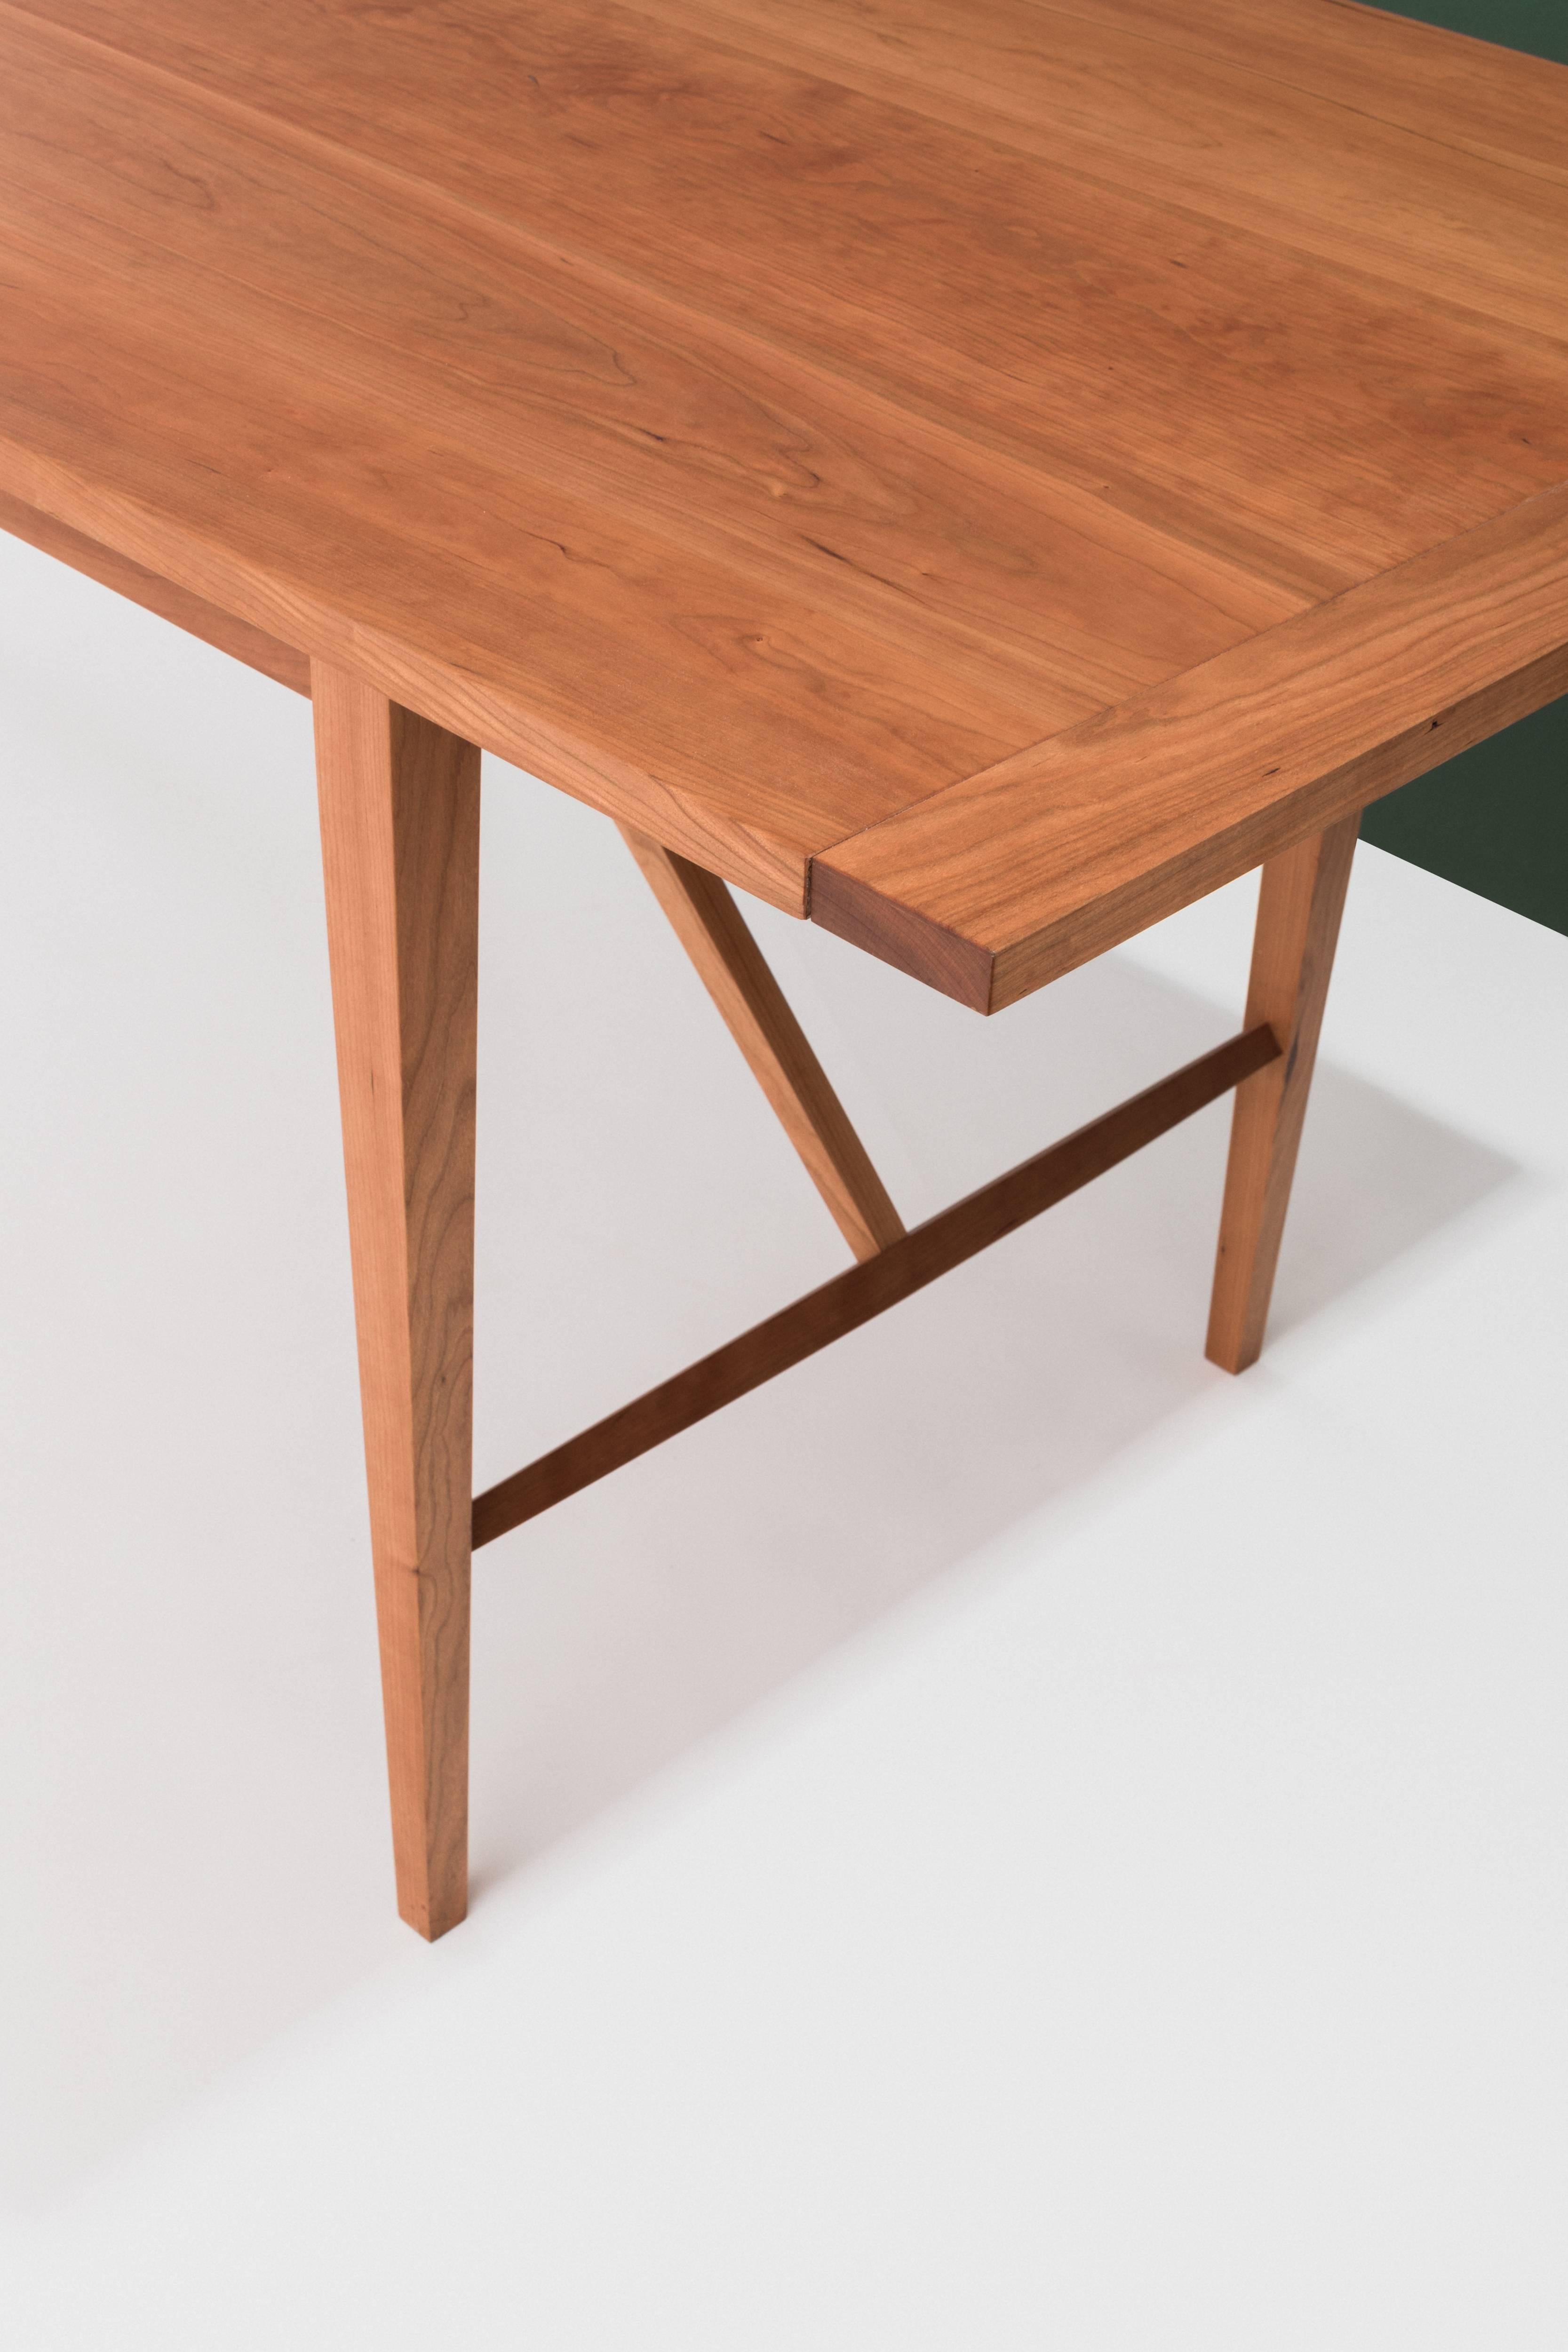 This lightweight yet sturdy dining table draws from Classic farm and Shaker table design. The slim profile and slightly shaped and tapered legs lend an elegance to the piece. 

Pictured in cherry and additionally offered in walnut and maple.